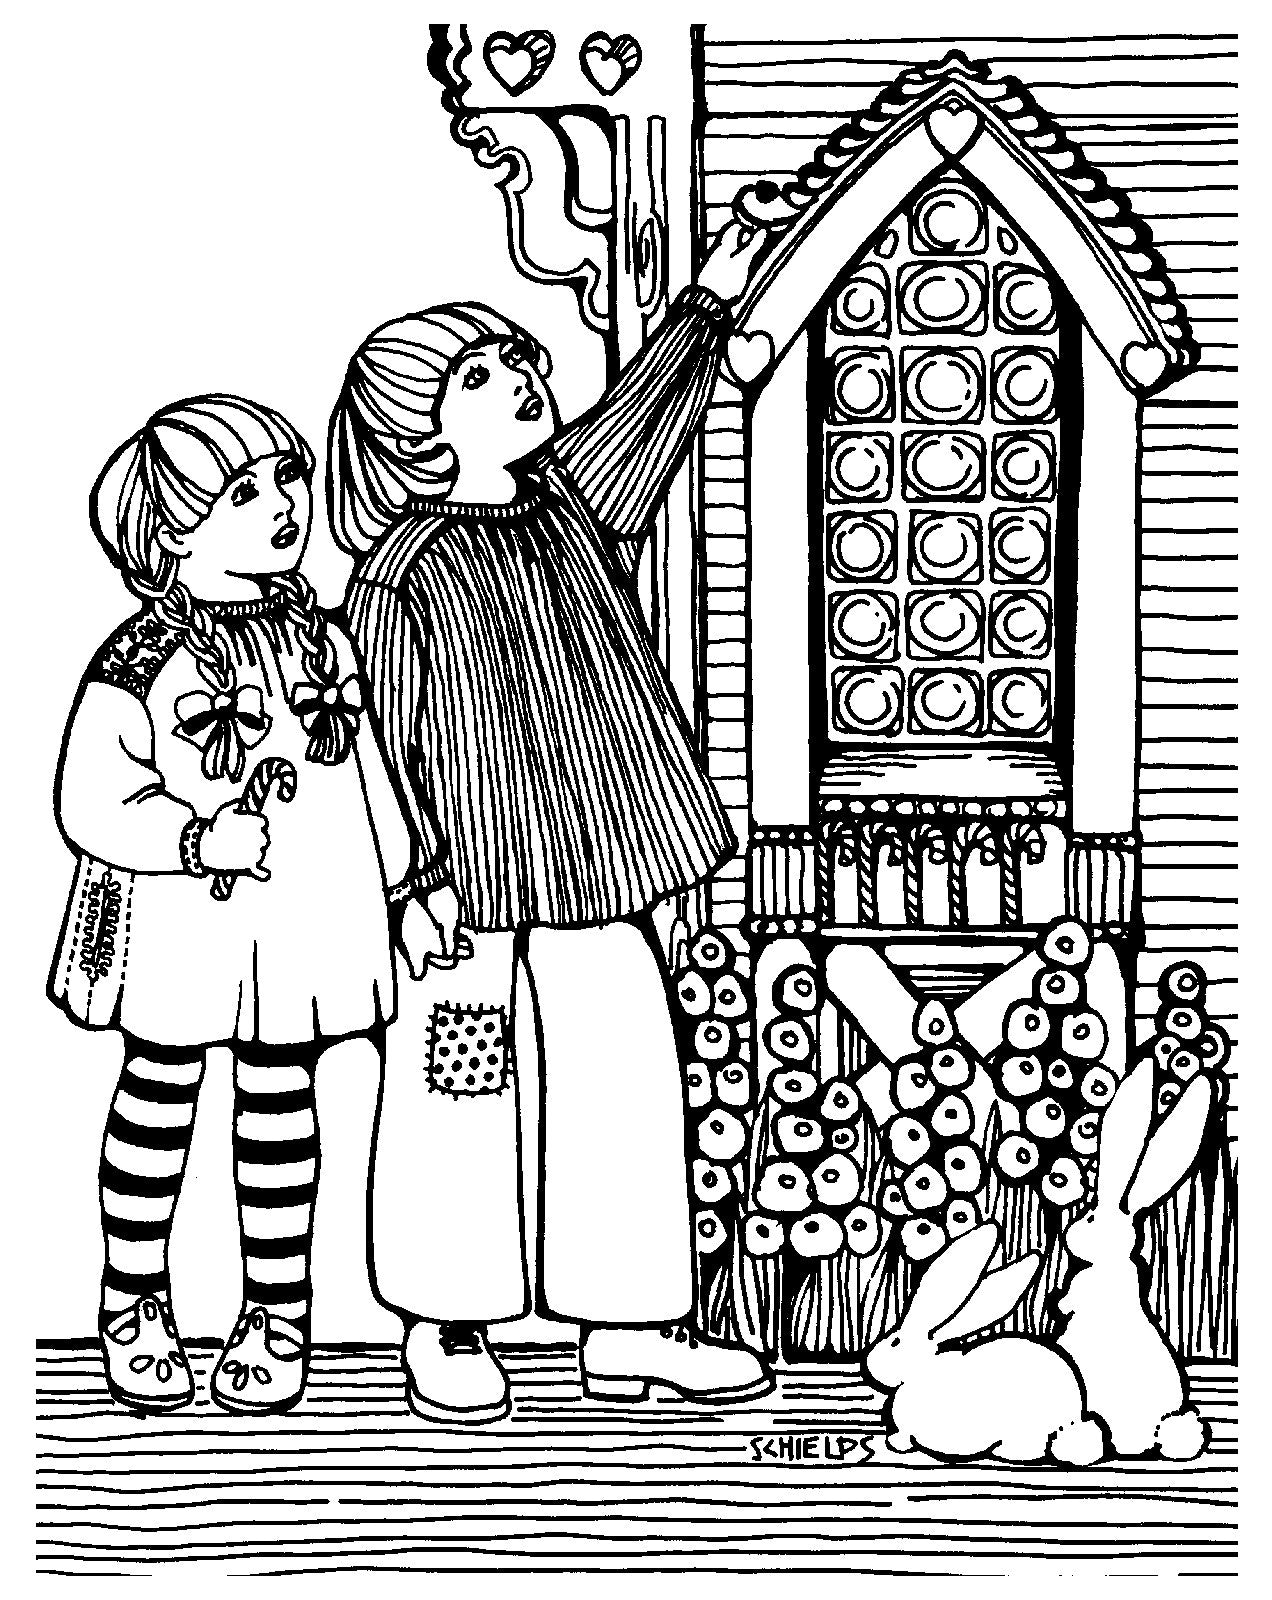 Black and white pen and ink drawing by Gretchen Shields.  A Young boy and girl stand outside a house wearing the smock and looking up at ornate window. Flowers grow under the window and bunnies sit in front of flowers.